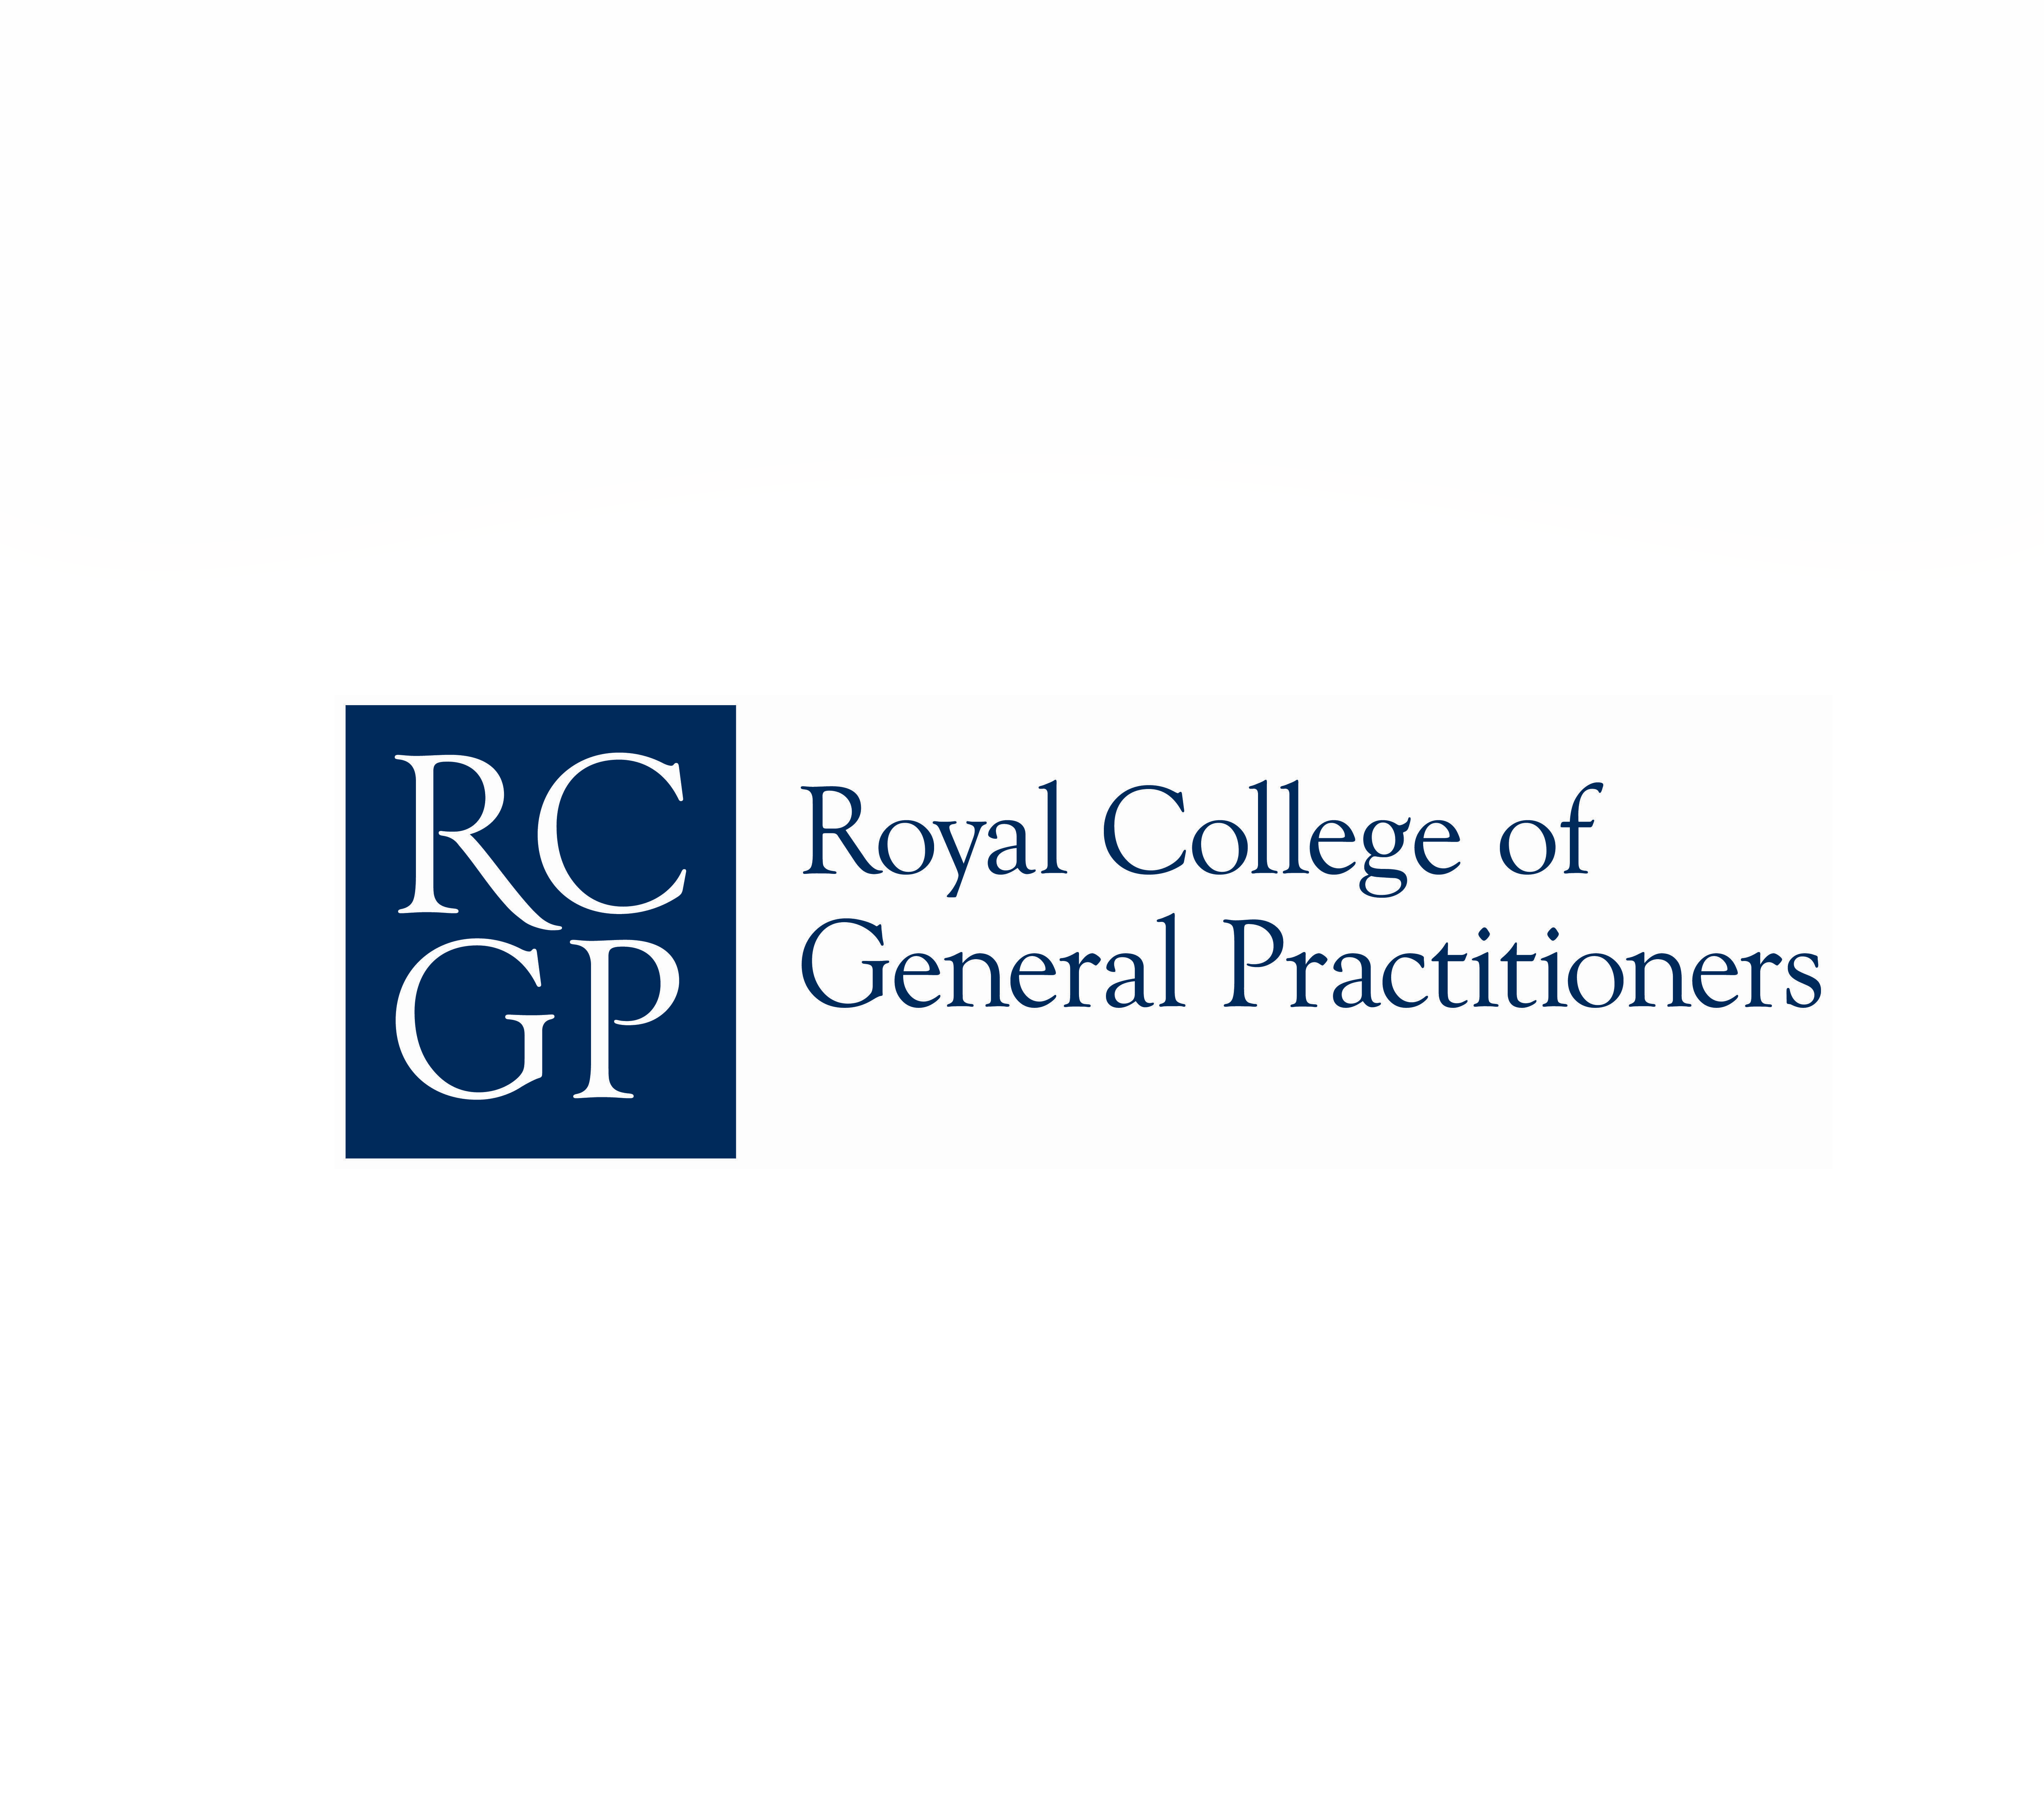 The Royal College of General Practitioners